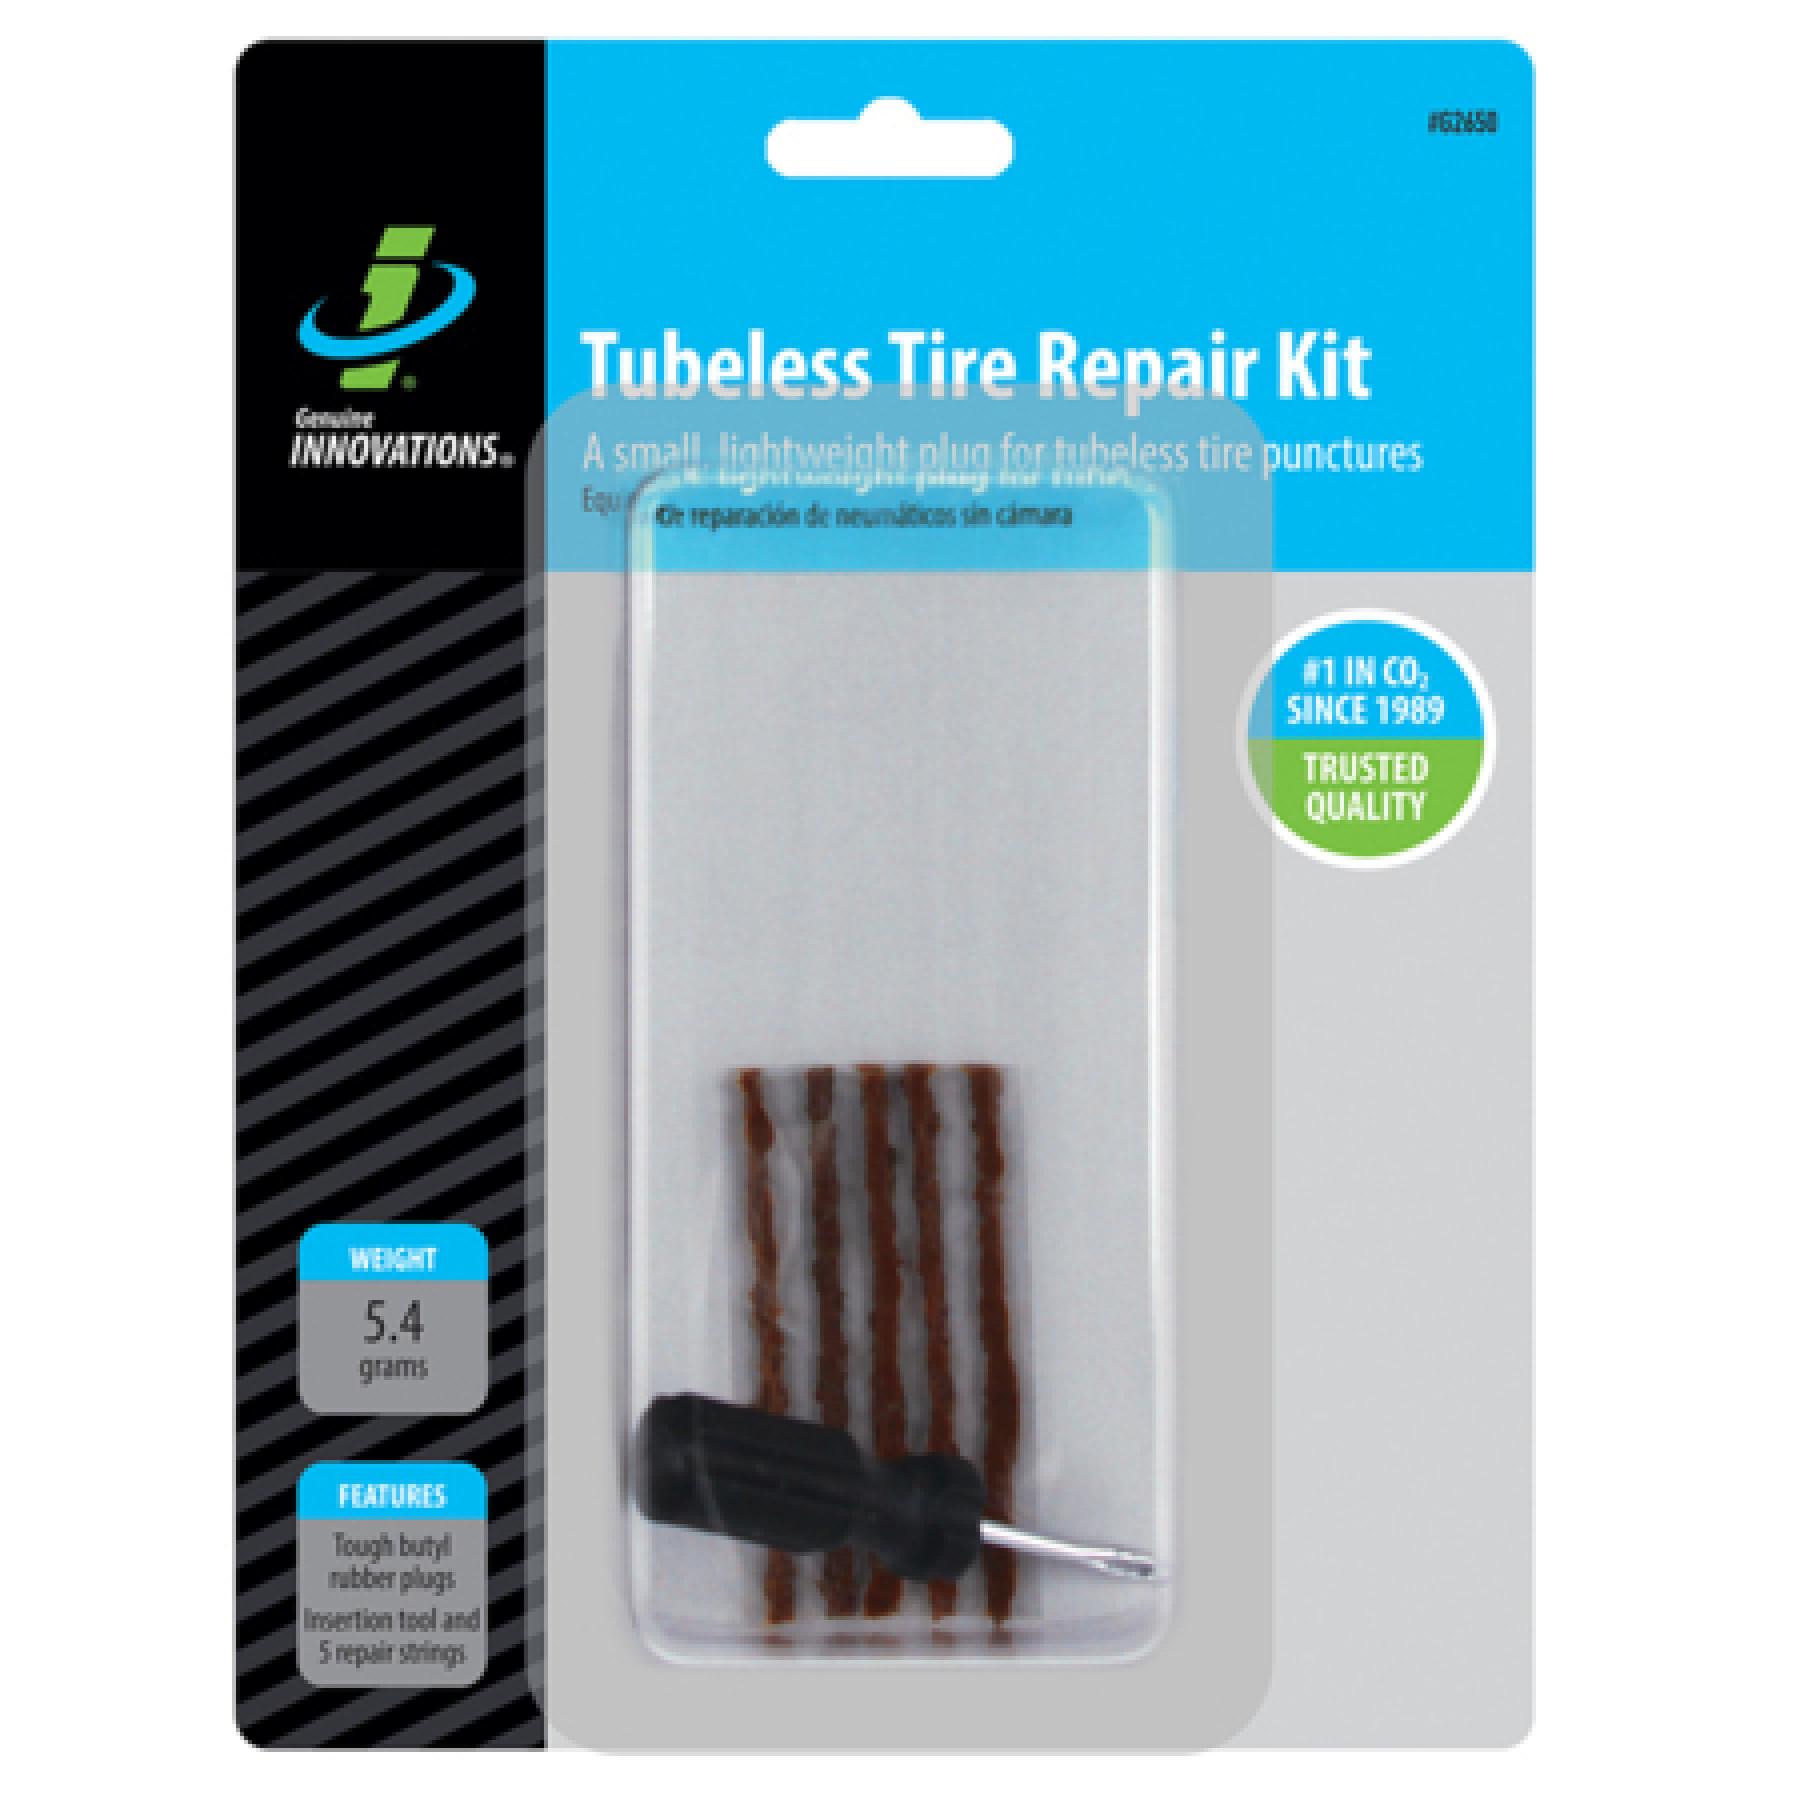 Inflation kit Innovations Tubeless Tire